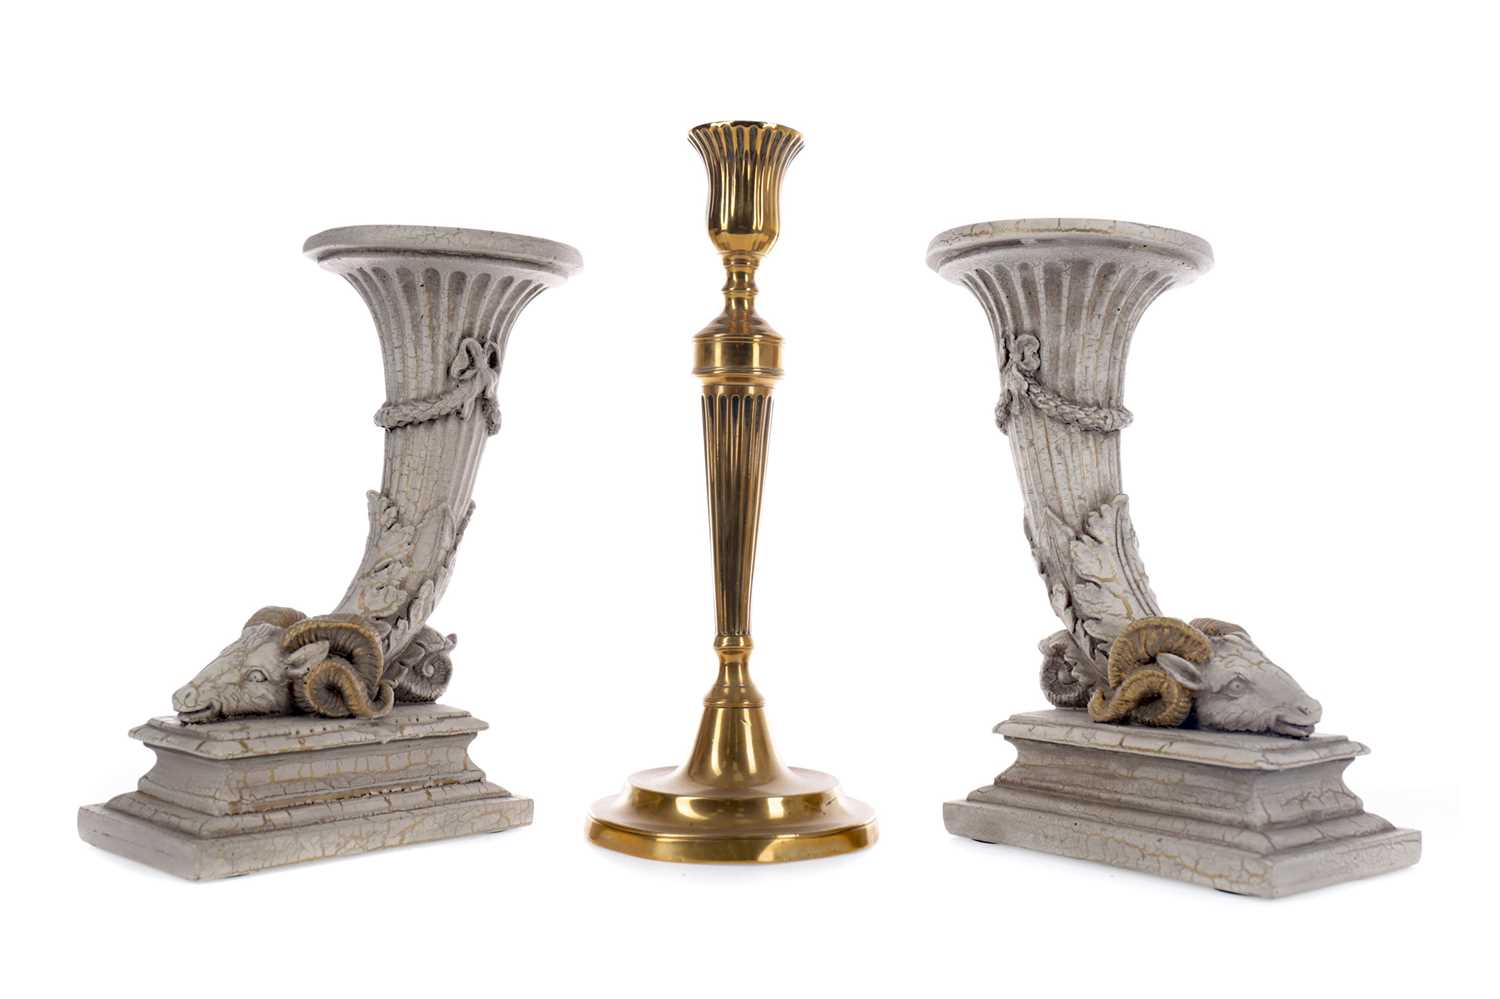 Lot 72 - A PAIR OF 20TH CENTURY SIMULATED STONE CANDLESTICKS AND A BRASS CANDLESTICK